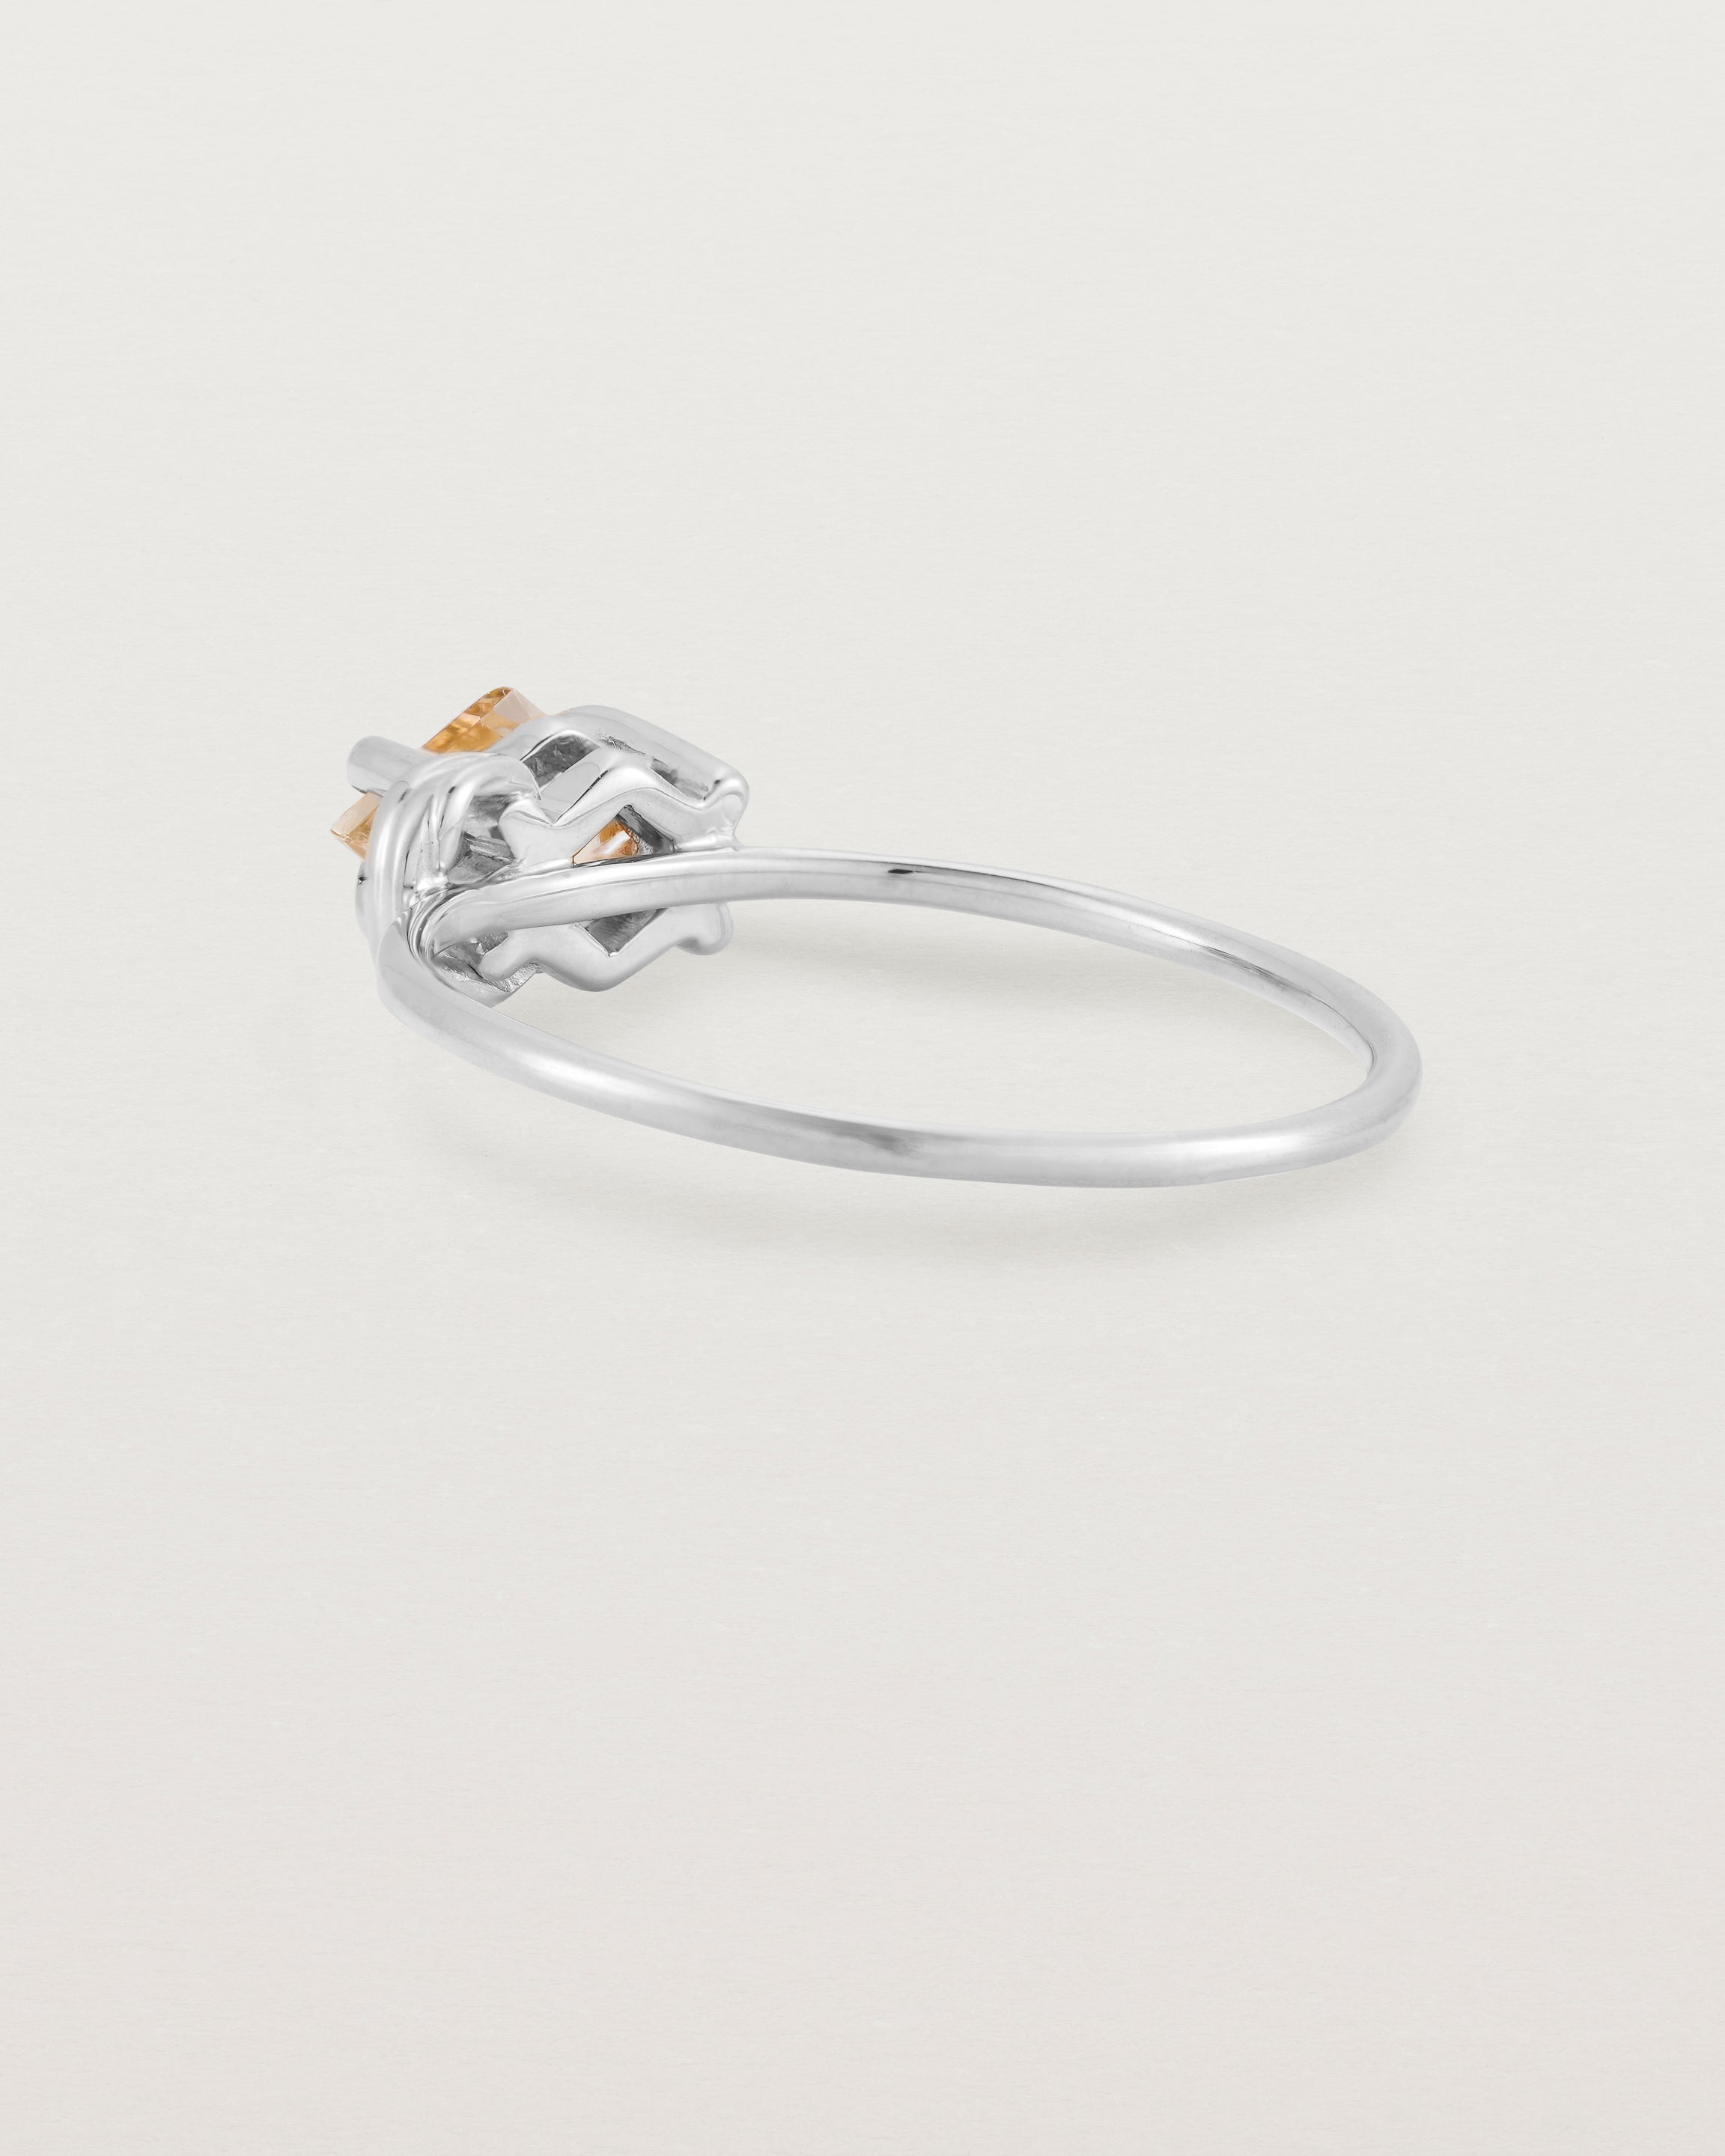 Back view of the Nuna Ring | Savannah Sunstone in White Gold.